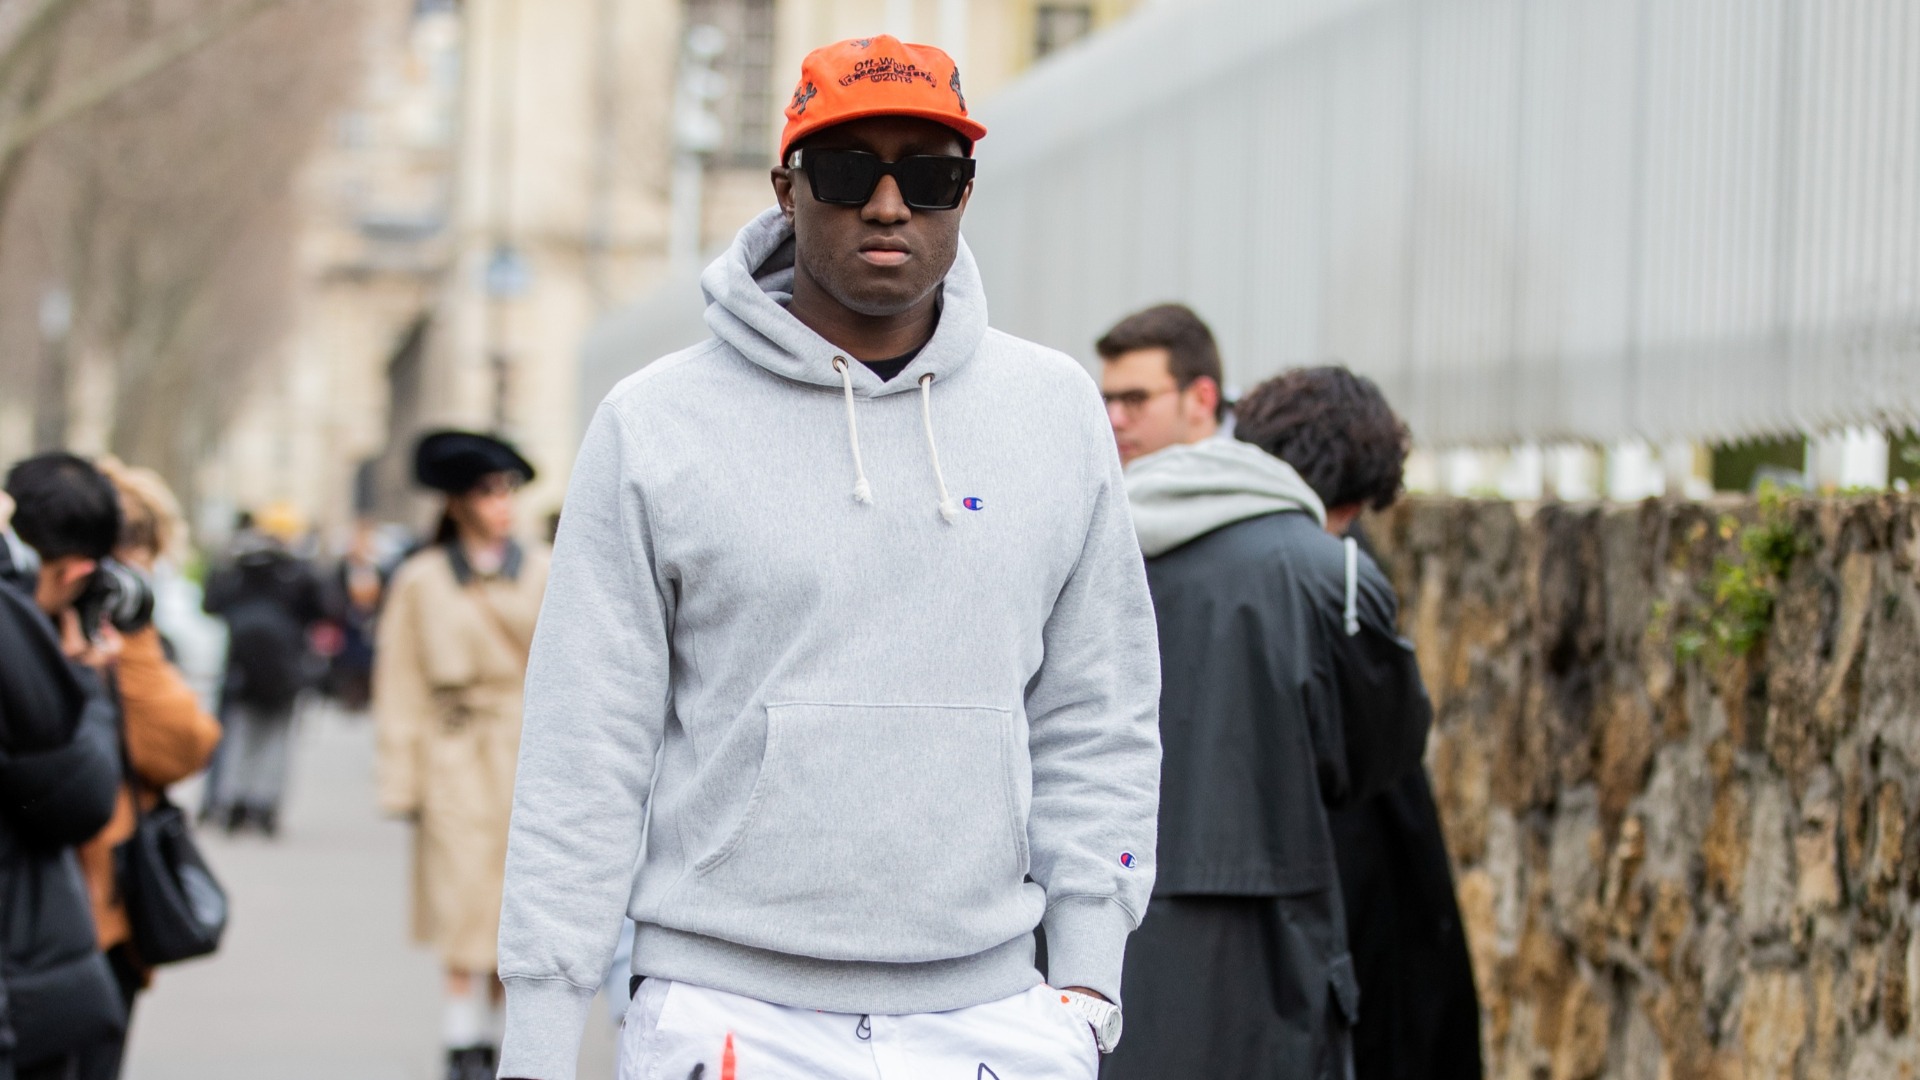 Virgil Abloh Sports a $1.8 Million Jacob & Co. Watch, Because He